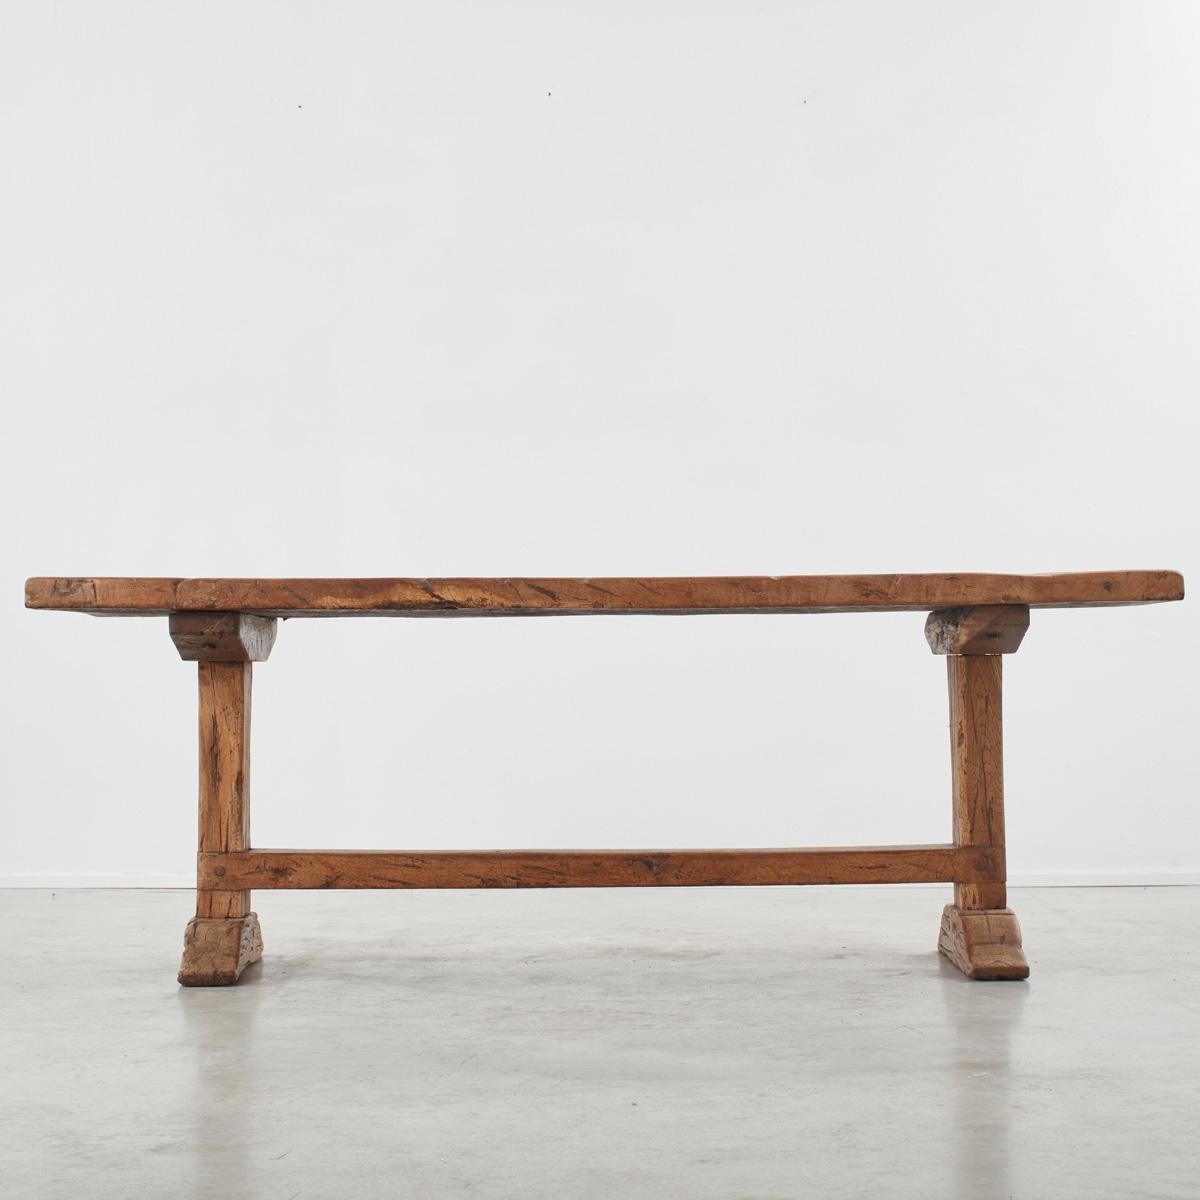 19th Century Antique Elm Wood Monastery Table from Auvergne, France 7